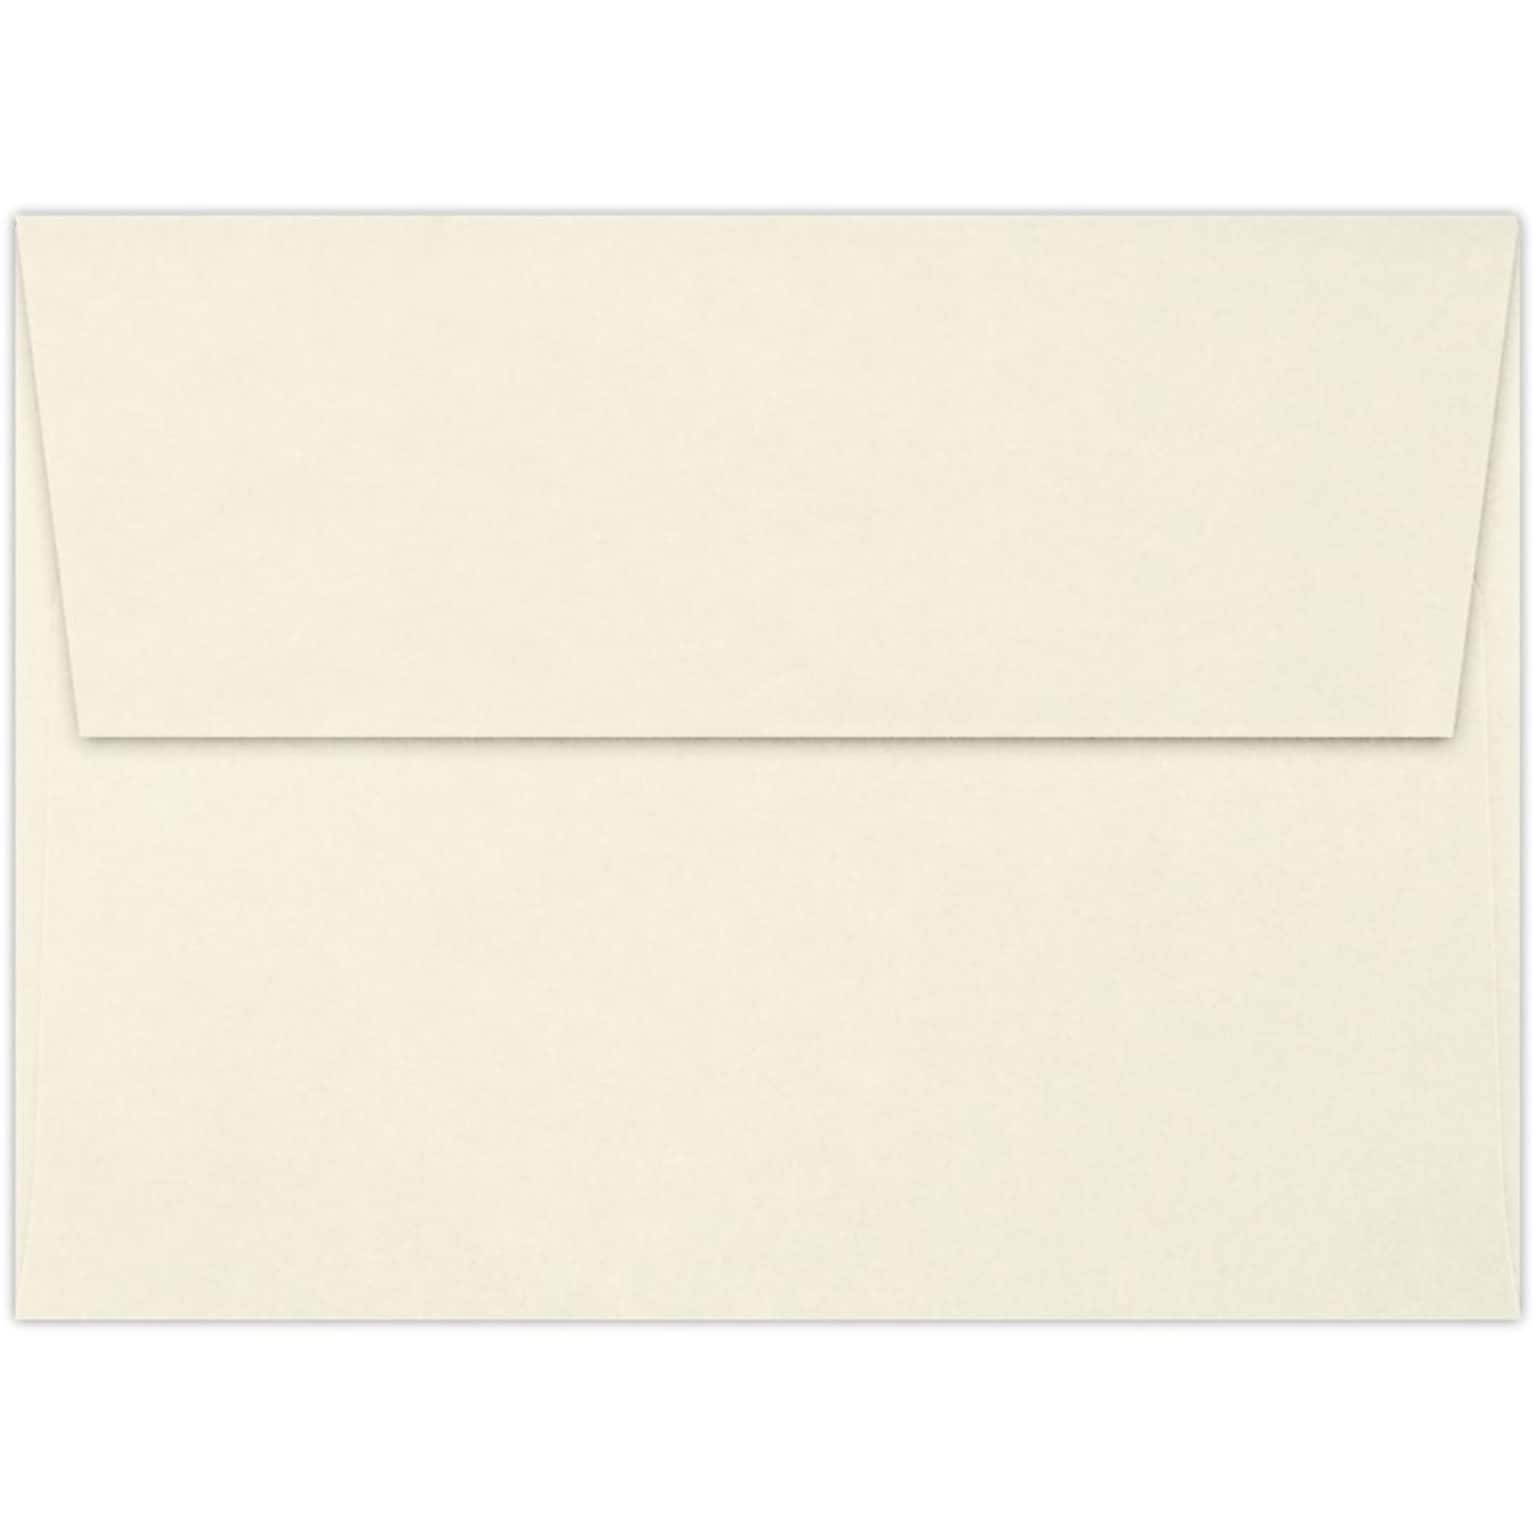 LUX A6 Invitation Envelopes (4 3/4 x 6 1/2) 1000/Pack, 70lb. Classic Crest® Natural White (4875-70NW-1000)